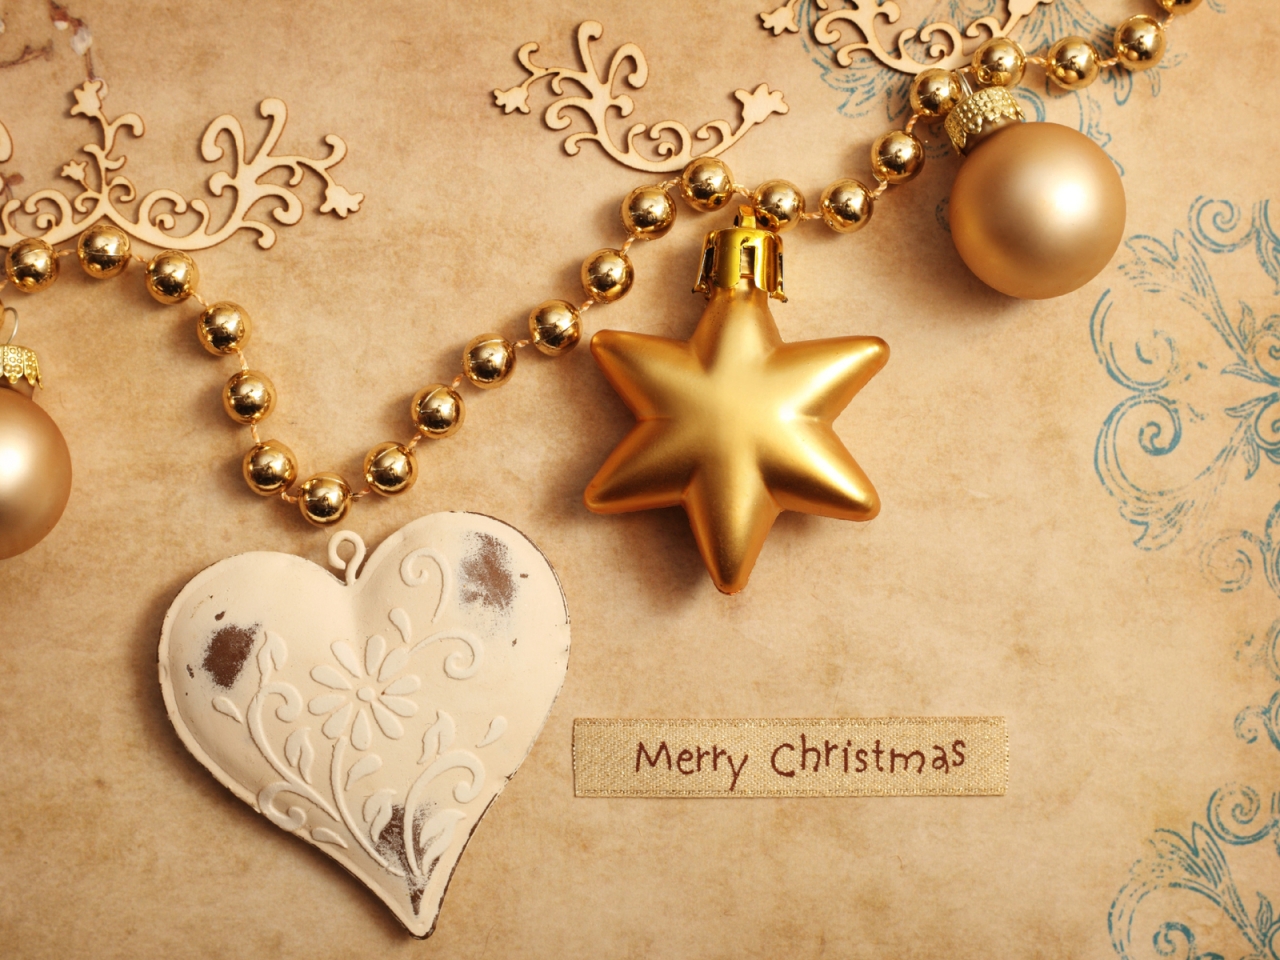 Merry Christmas Card for 1280 x 960 resolution